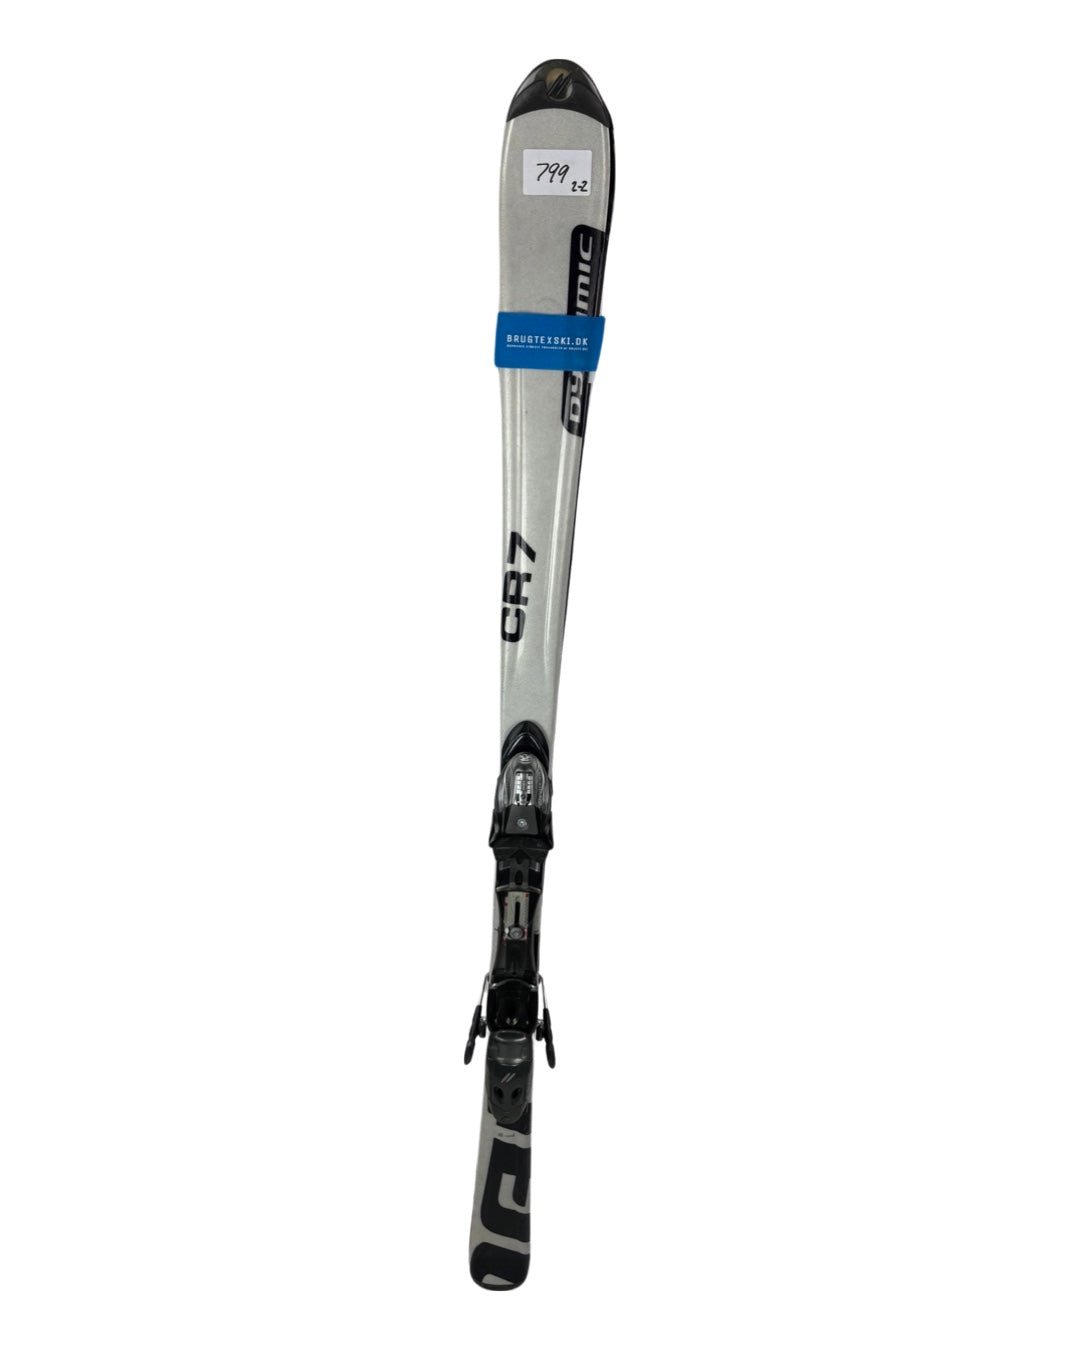 Adult skis - mixed 799 2